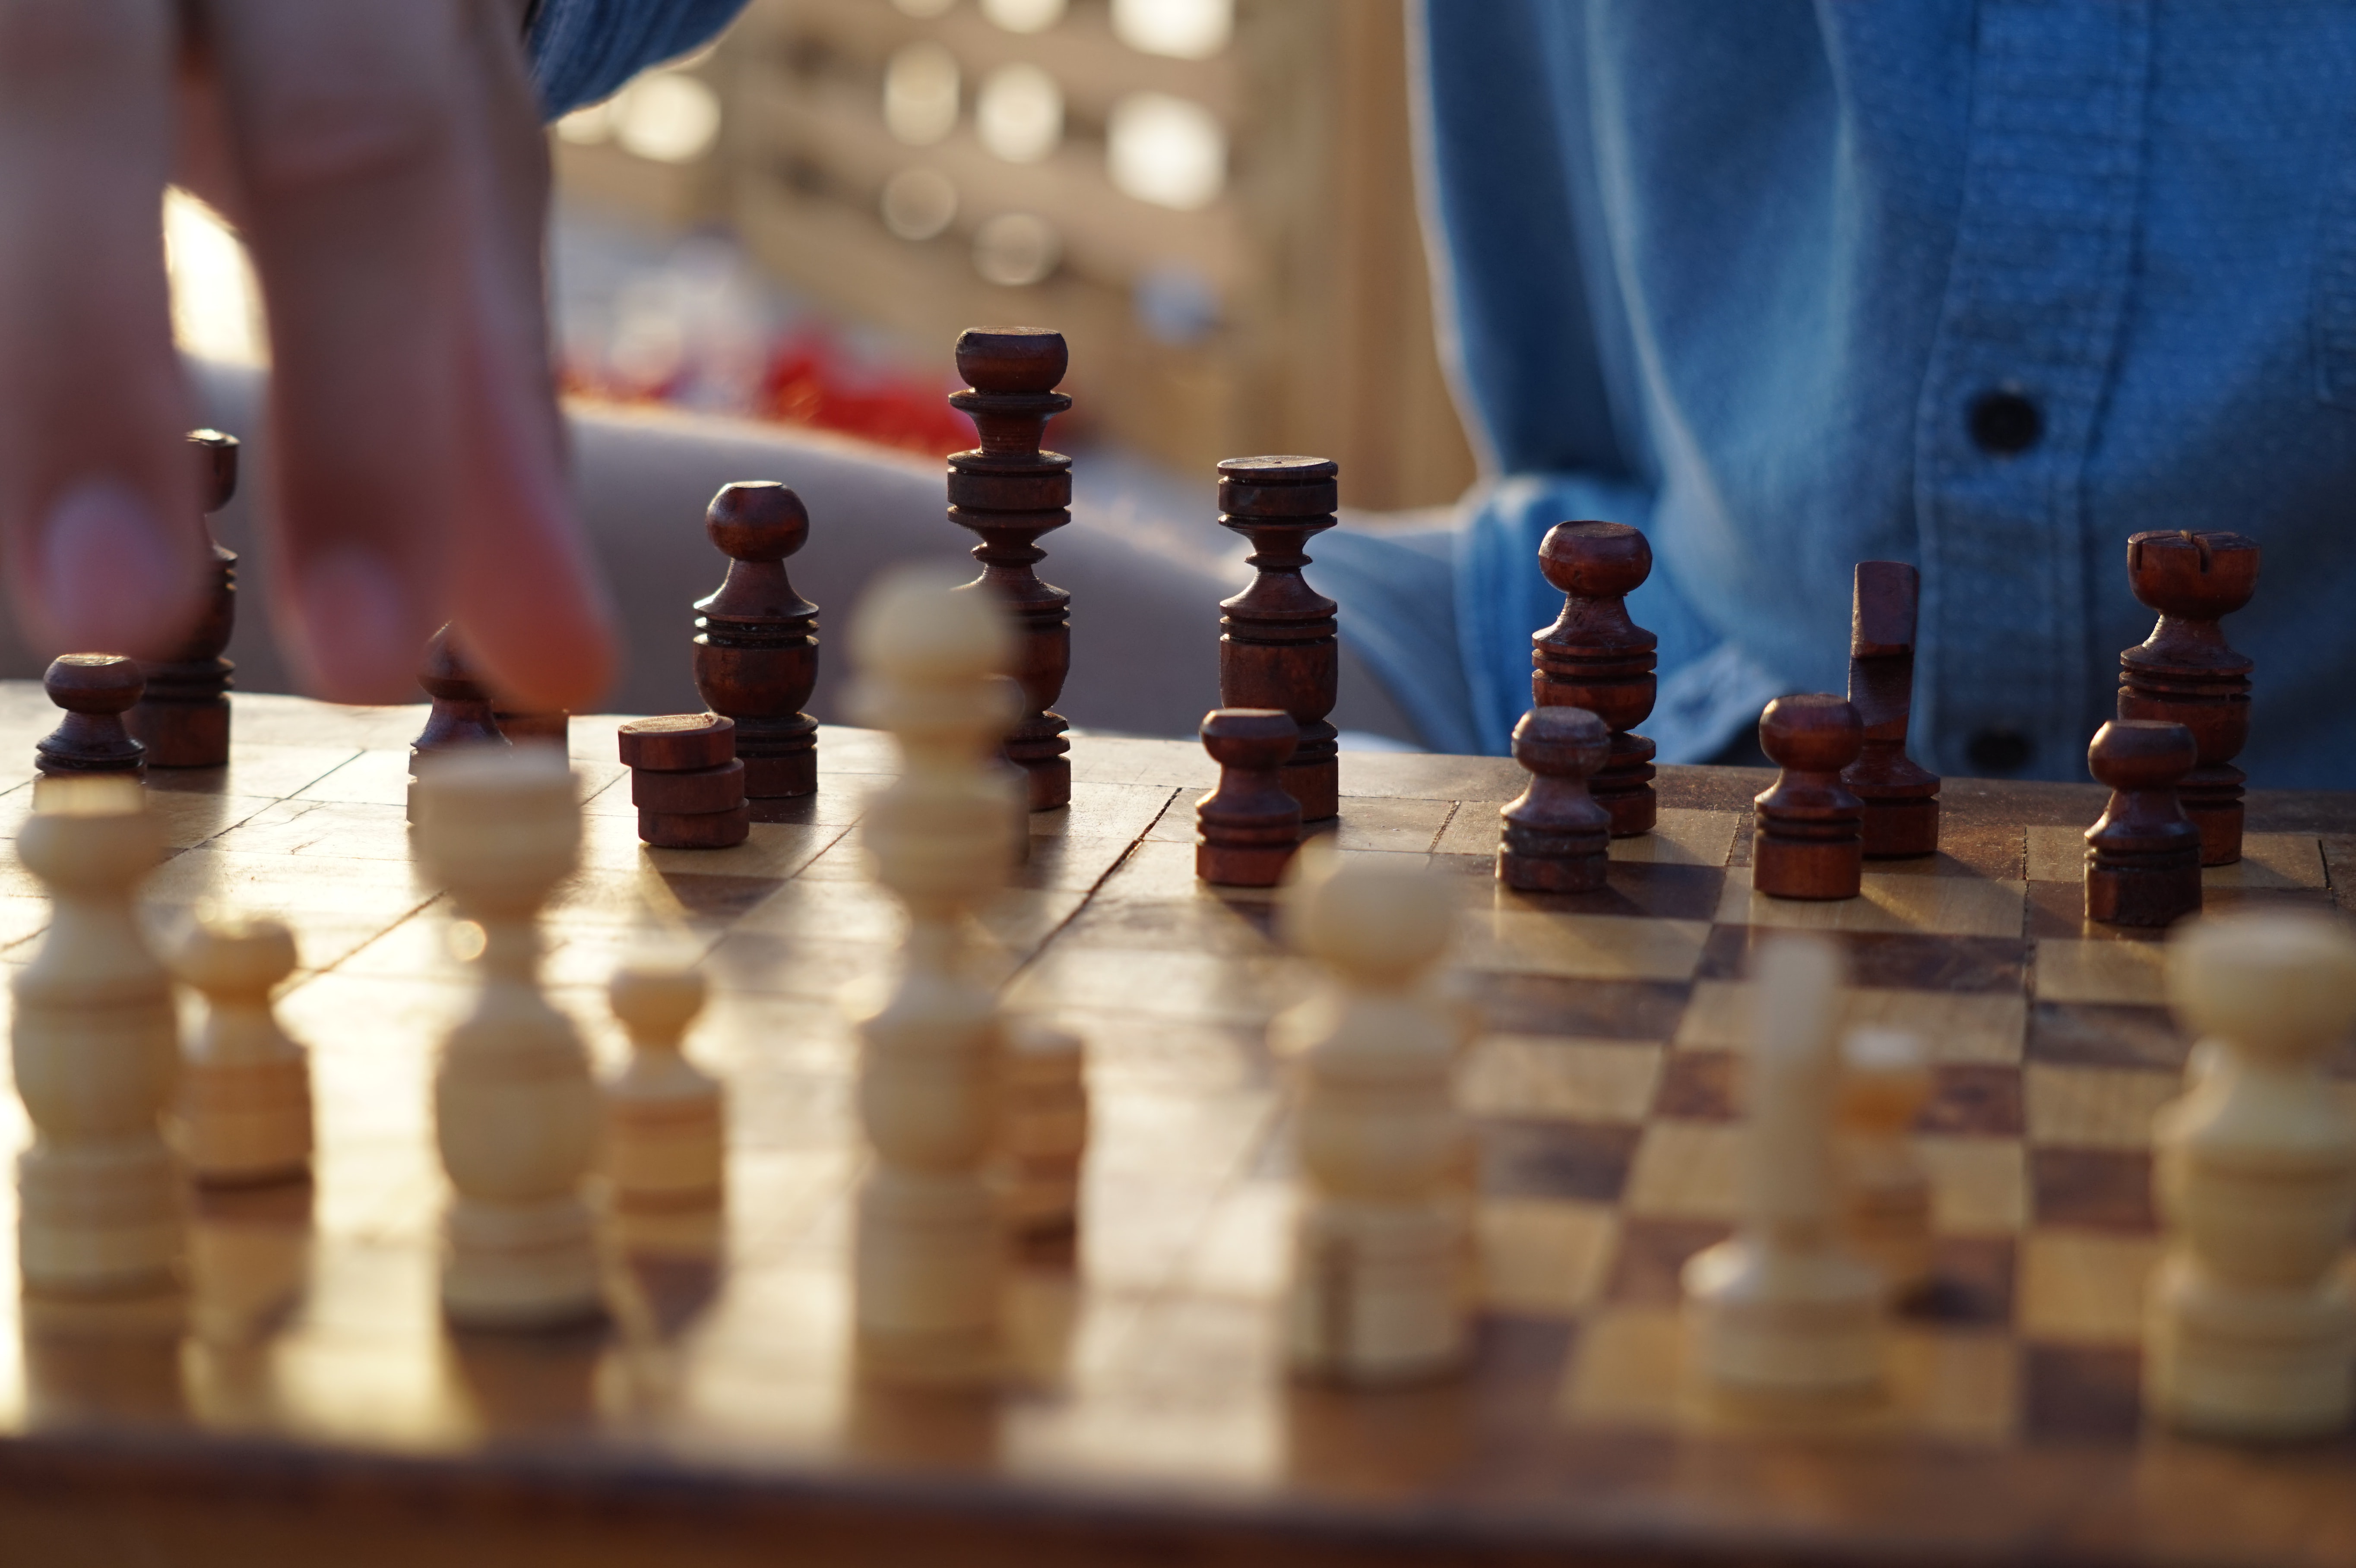 Learn chess (or any strategy game).